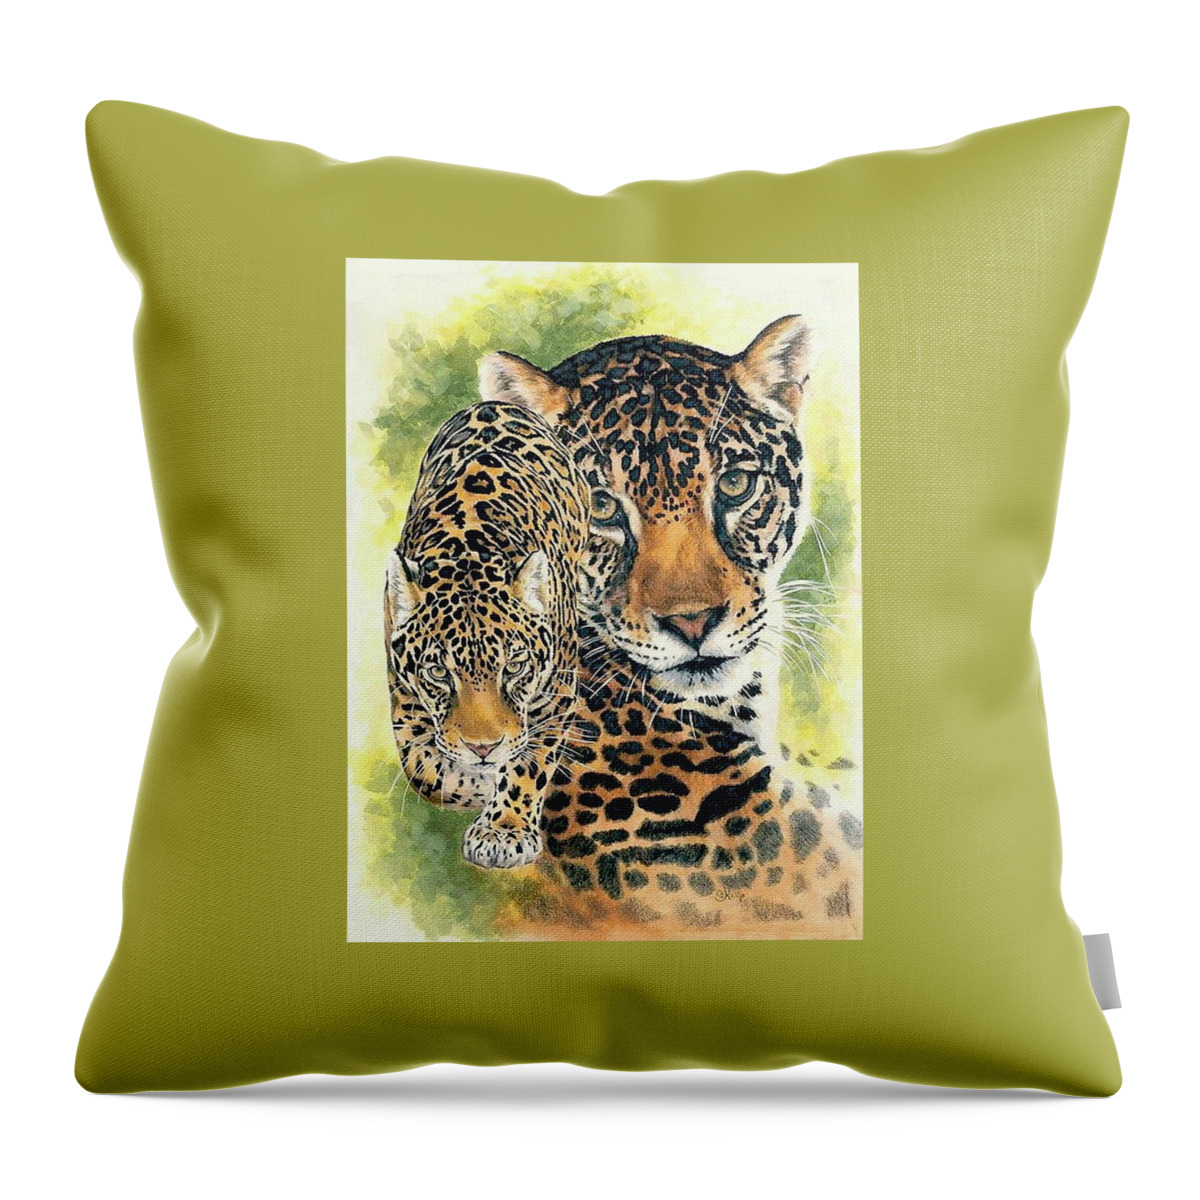 Jaguar Throw Pillow featuring the mixed media Compelling by Barbara Keith